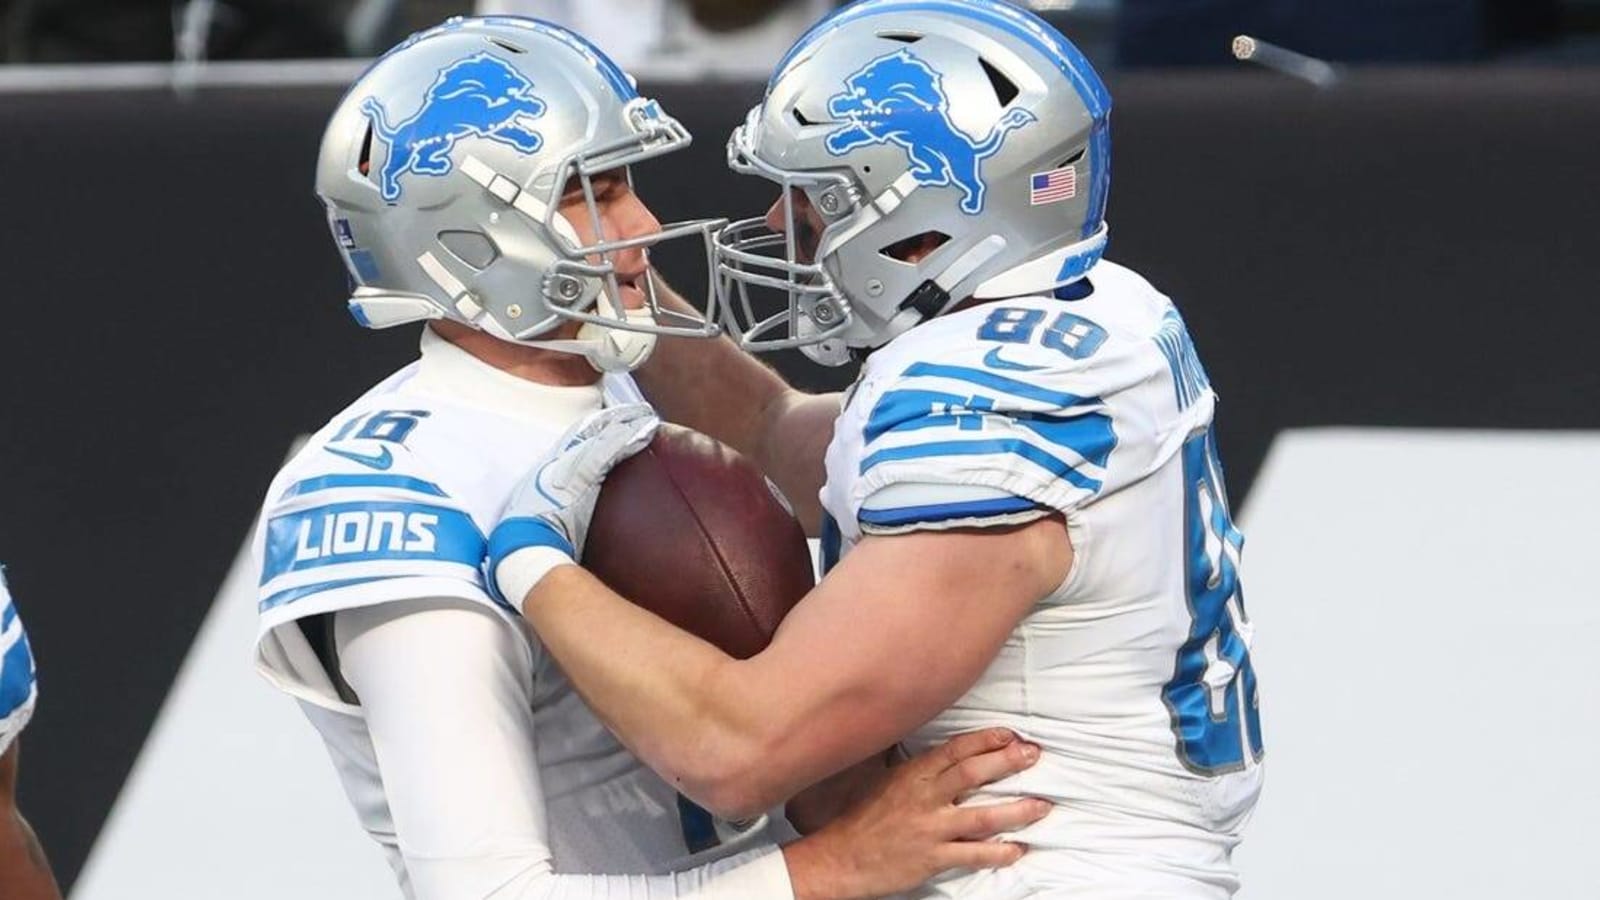 Lions creeping closer to playoffs ahead of Panthers matchup